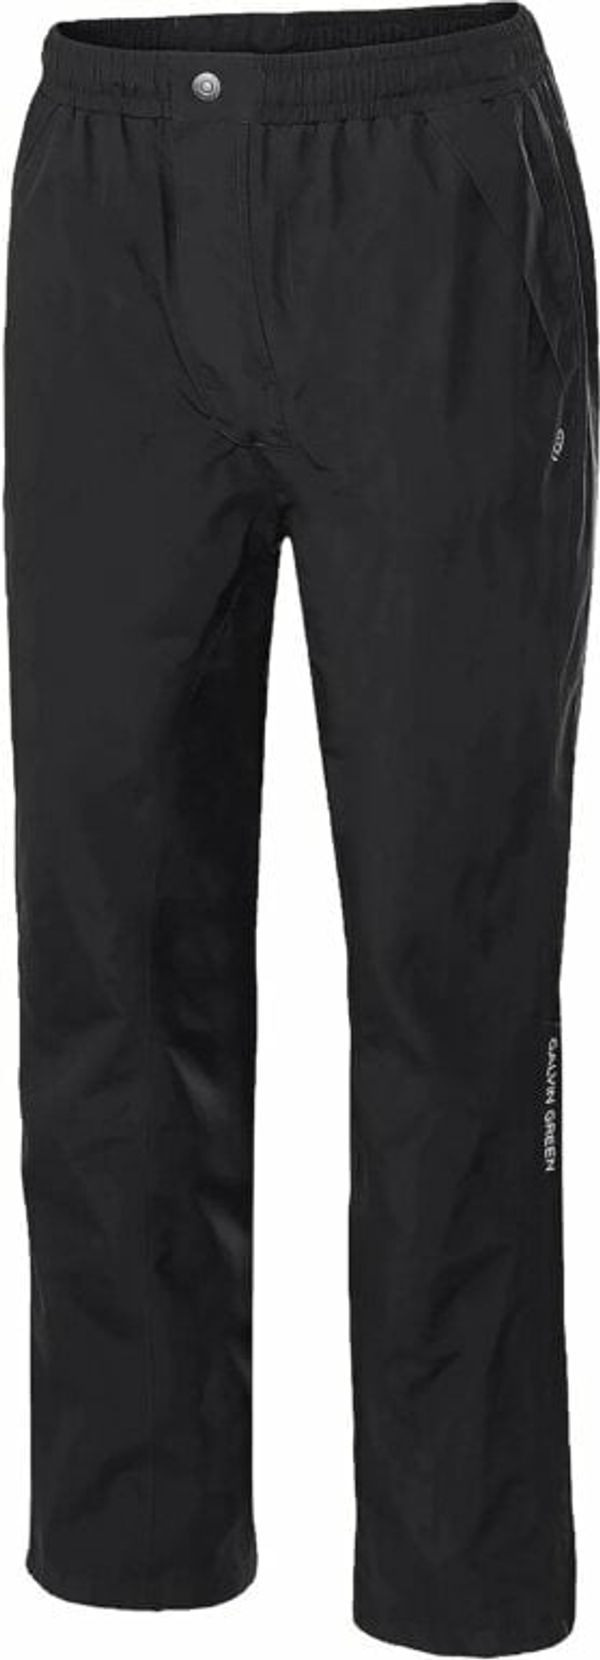 Galvin Green Galvin Green Andy Trousers Black 4XL